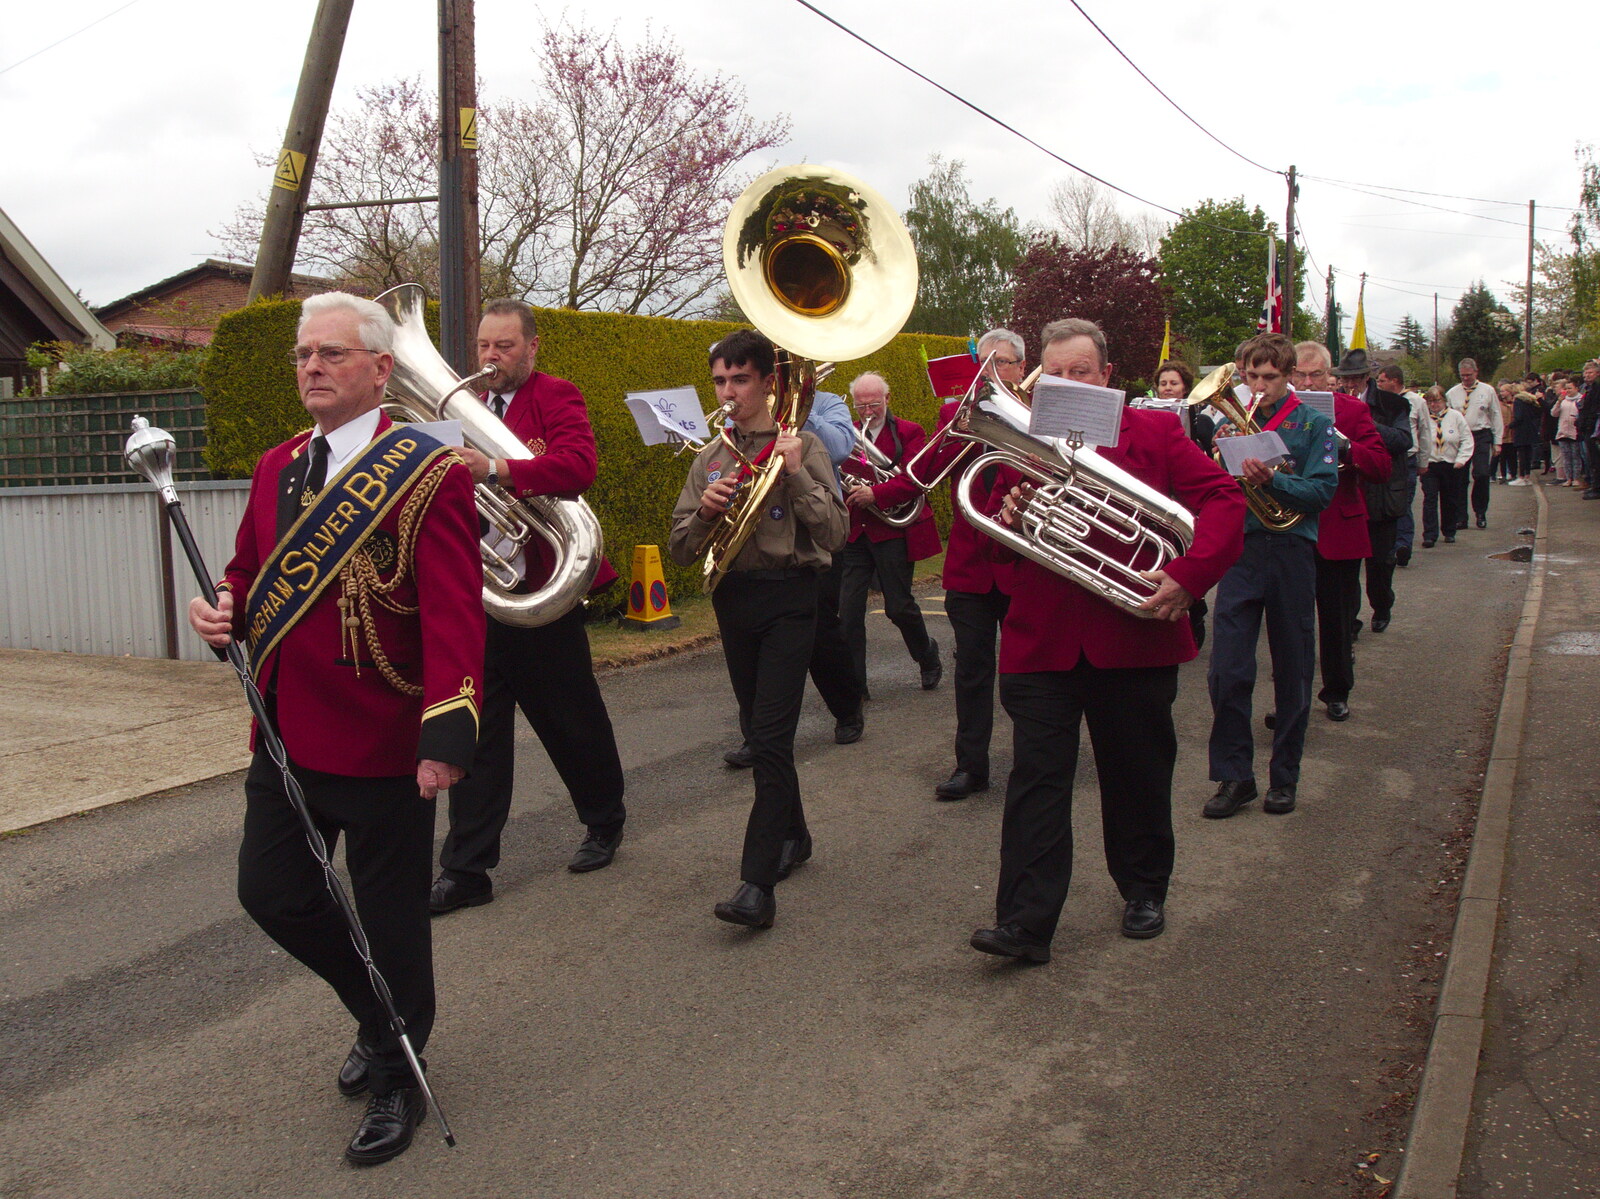 Terry leads the GSB off up the road from A St. George's Day Parade, Dickleburgh, Norfolk - 28th April 2019